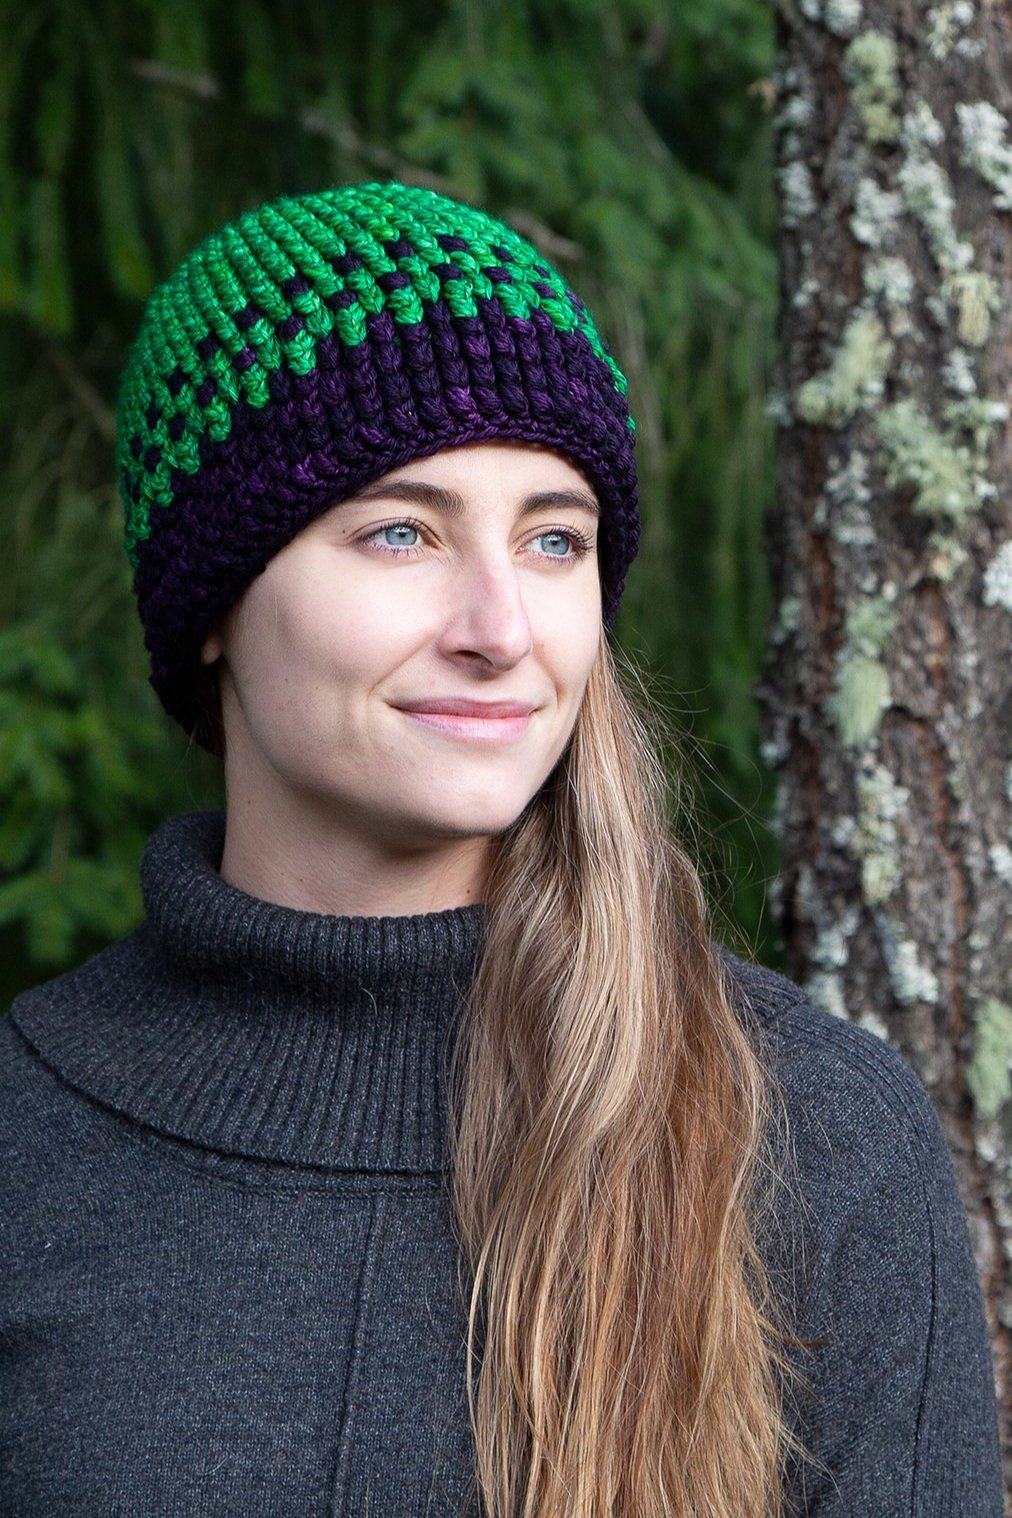 A woman with long brown hair wears the crocheted Yarn Dragon Beanie made out of green and purple yarn.